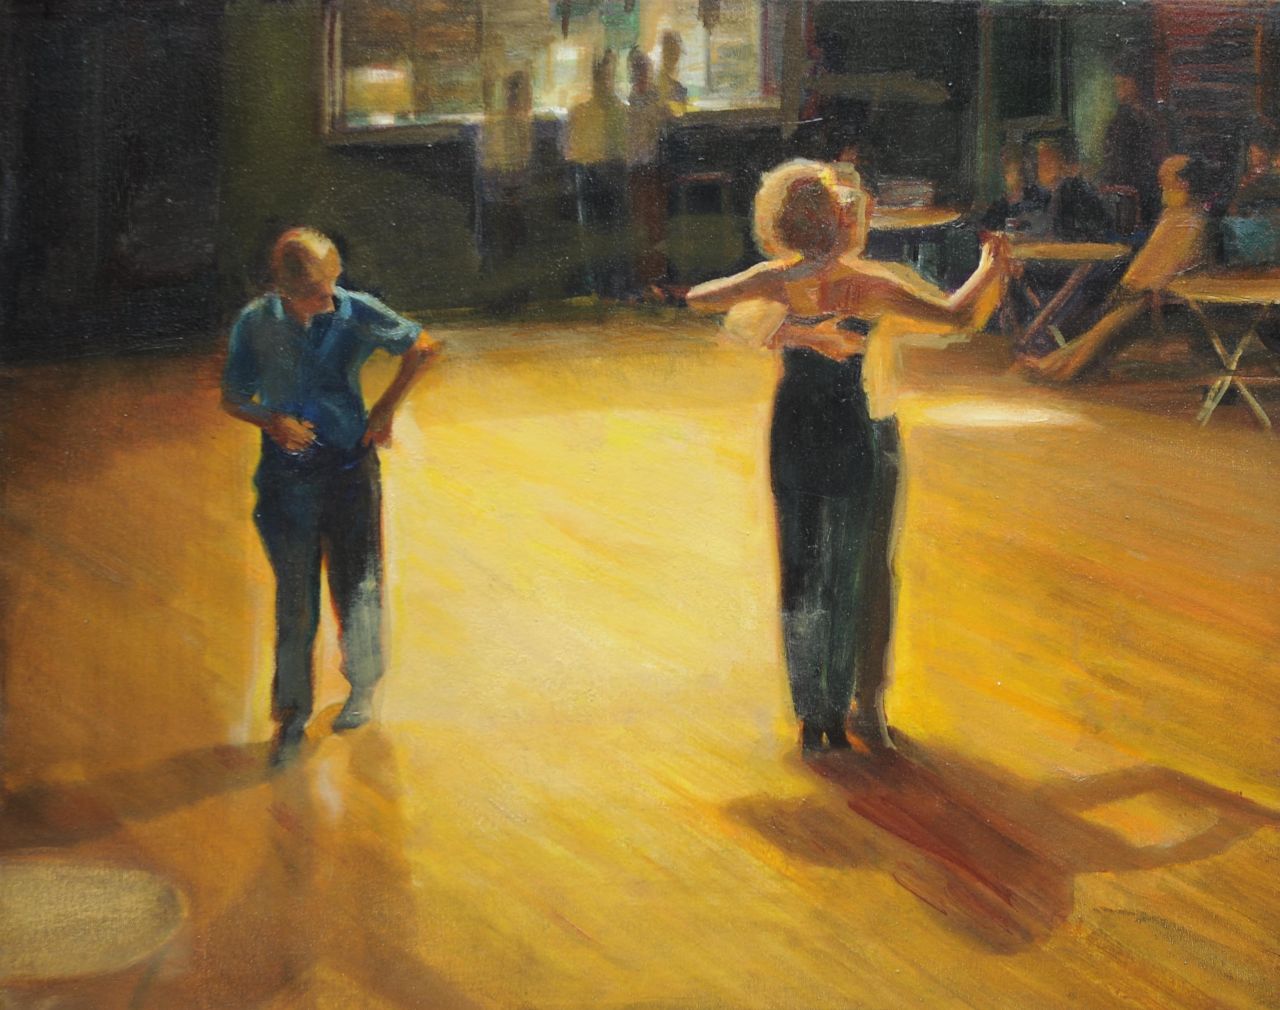 Kaplan D.  | Daniel Kaplan, Tango lesson, oil on canvas 60.0 x 77.0 cm, signed on the reverse with initials and dated on the reverse 2001/2002